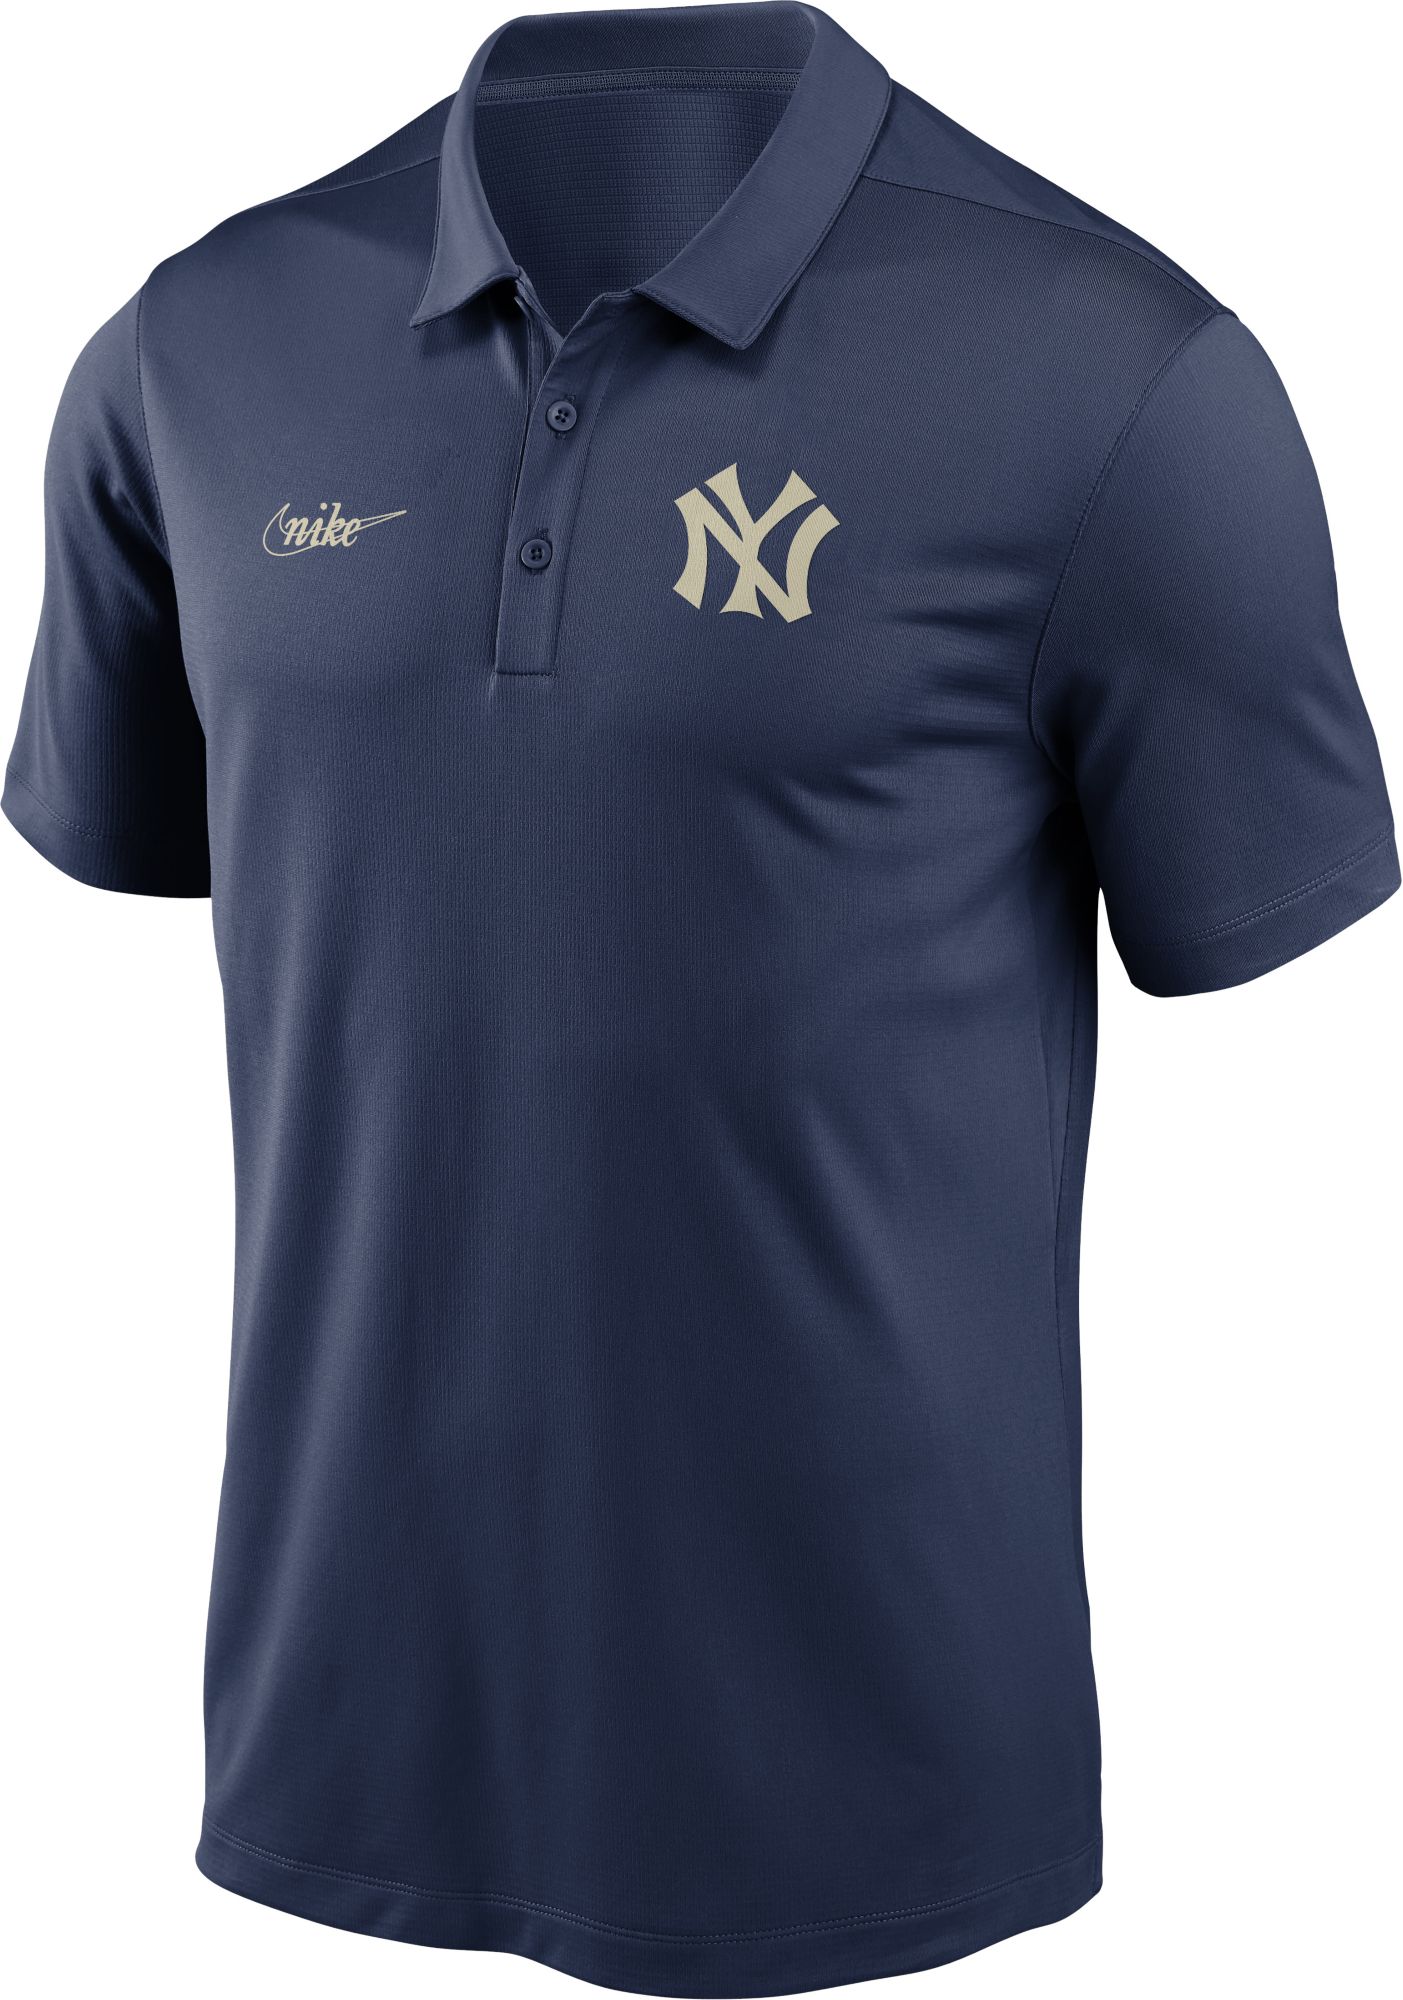 Nike / Men's New York Yankees Navy Cooperstown Vintage Dri-FIT Franchise  Polo